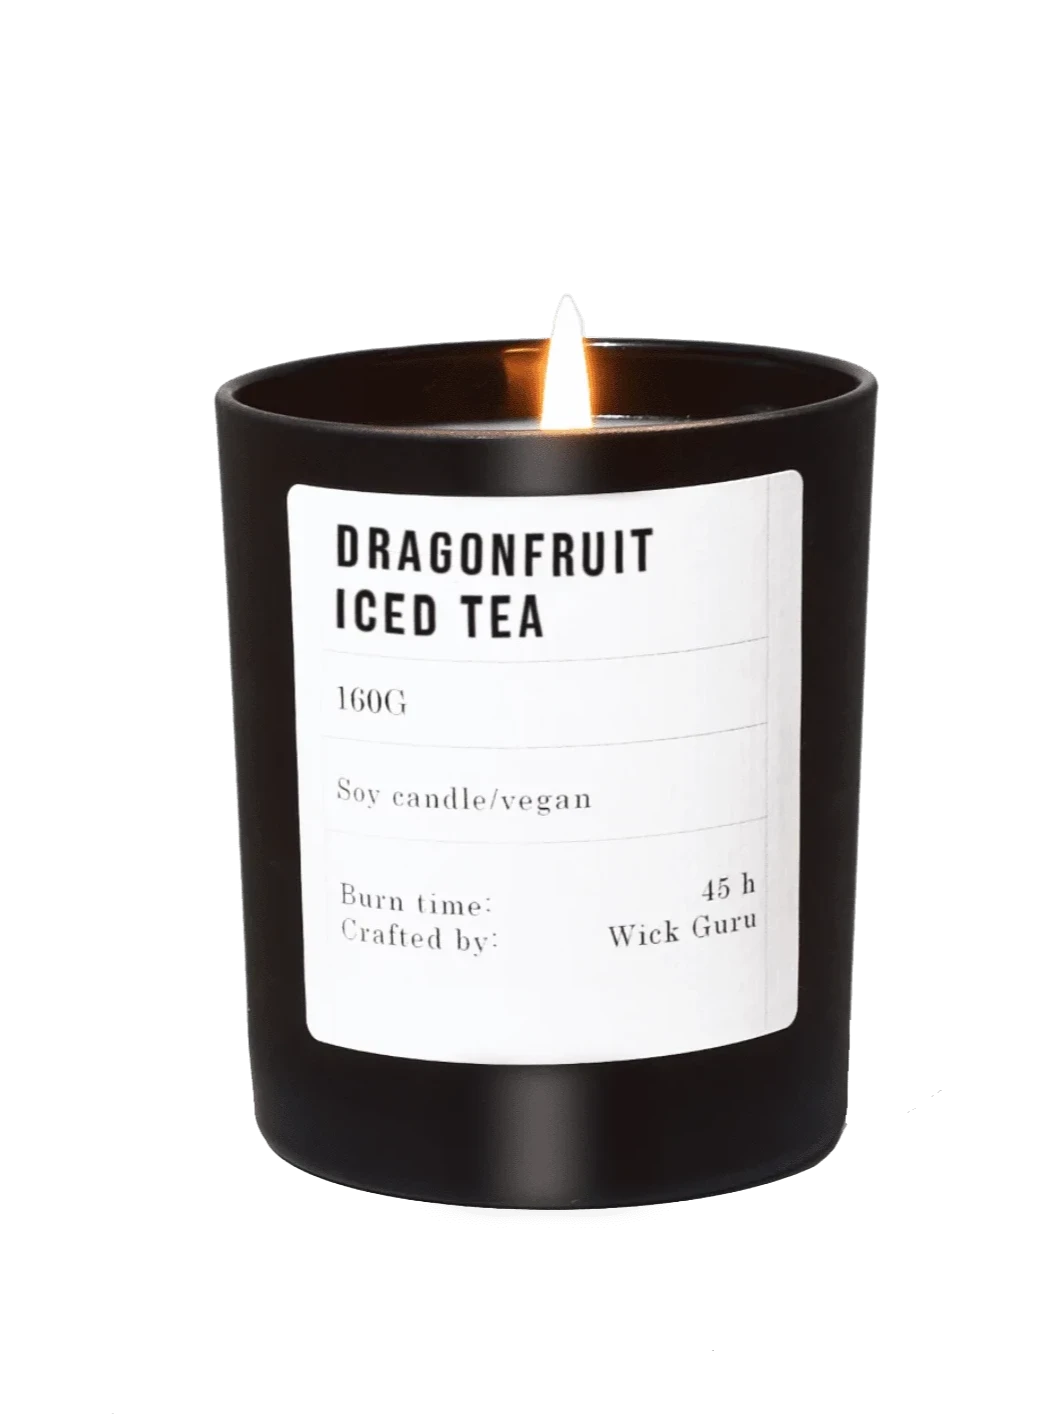 Dragonfruit Iced Tea Glass Candle - A lit soy candle with a sleek, minimalistic label, set against a black matte candle and a transparent background.